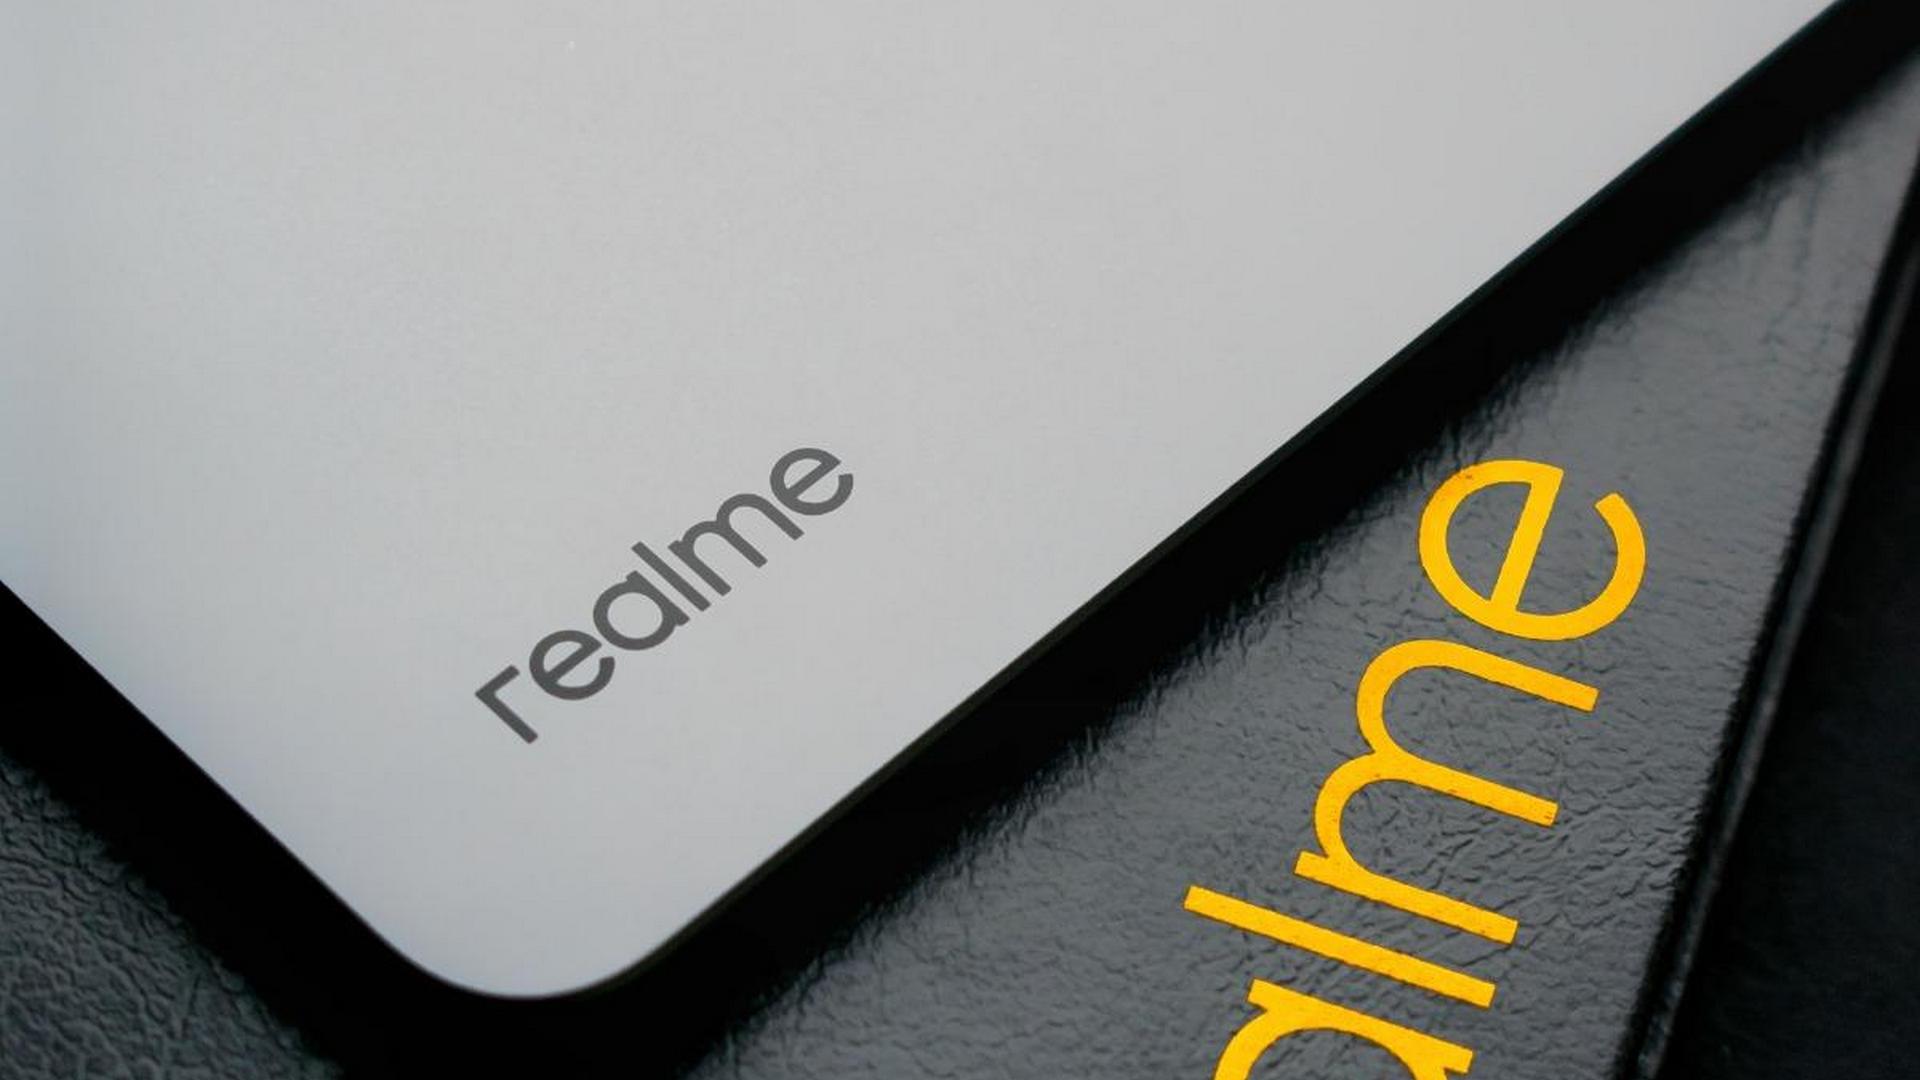 Realme Pad price revealed before the announcement